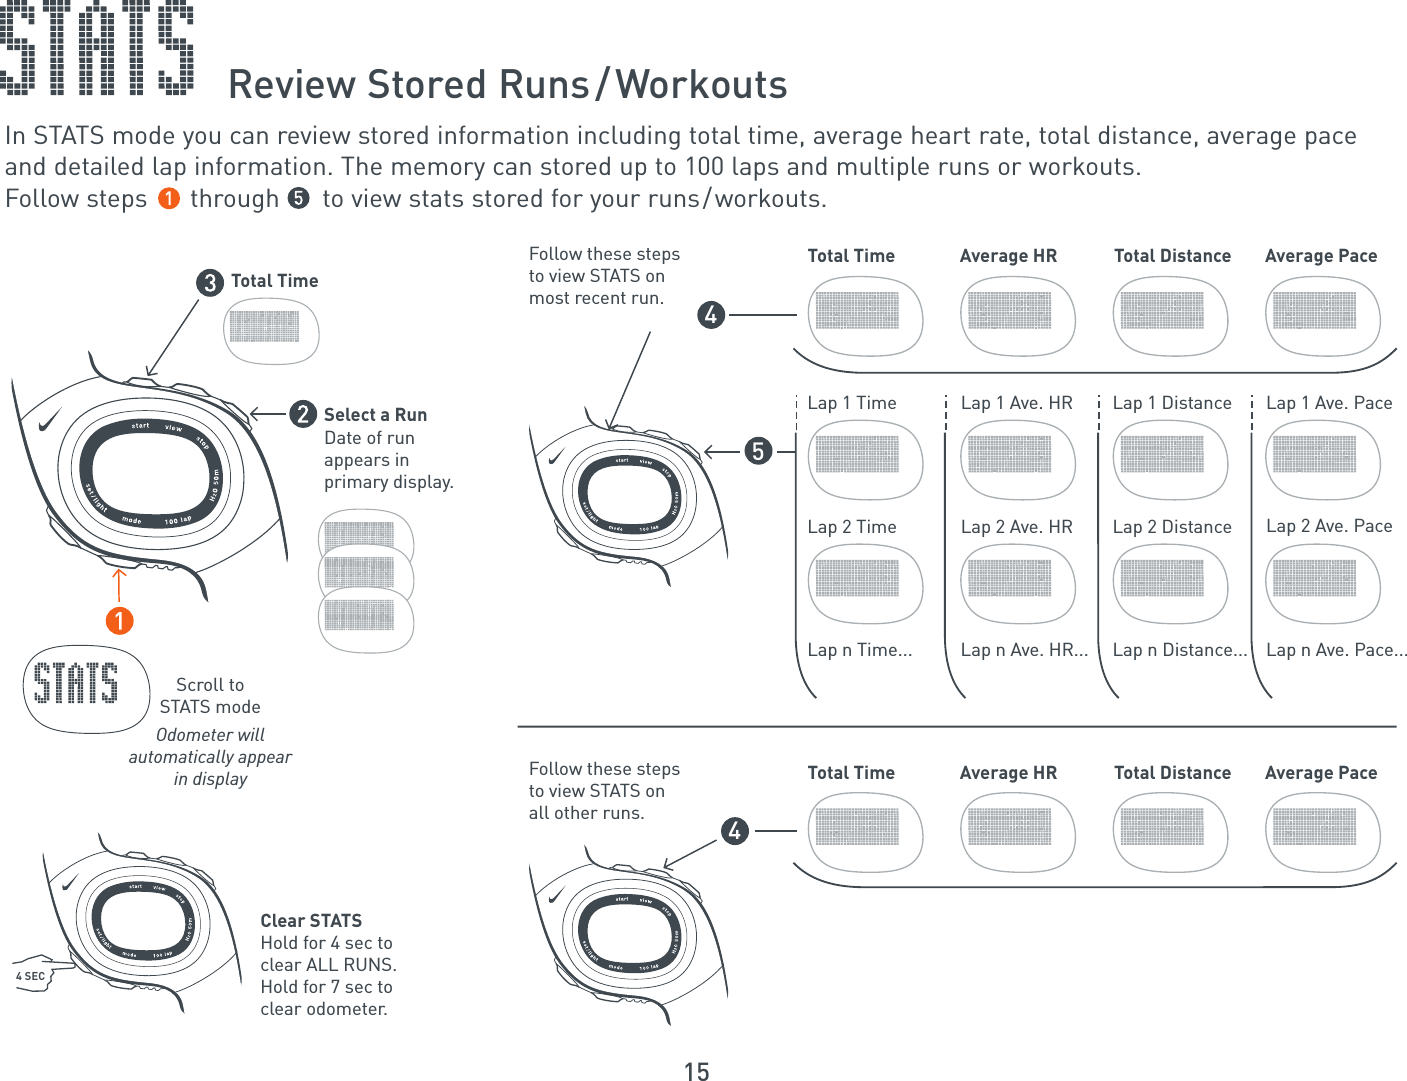 15Review Stored Runs/WorkoutsIn STATS mode you can review stored information including total time, average heart rate, total distance, average pace and detailed lap information. The memory can stored up to 100 laps and multiple runs or workouts.Follow steps      through      to view stats stored for your runs/workouts.Scroll toSTATS modeOdometer willautomatically appearin displaySelect a RunDate of runappears inprimary display.Total TimeFollow these stepsto view STATS on most recent run.Follow these stepsto view STATS on all other runs.Clear STATSHold for 4 sec toclear ALL RUNS.Hold for 7 sec toclear odometer.Total Time Average HR Total Distance Average PaceLap 1 TimeLap 2 TimeLap 1 Ave. HRLap 2 Ave. HRLap 1 DistanceLap 2 DistanceLap 1 Ave. PaceLap 2 Ave. PaceLap n Time... Lap n Ave. HR... Lap n Distance... Lap n Ave. Pace...4Total Time Average HR Total Distance Average Pace454 SEC